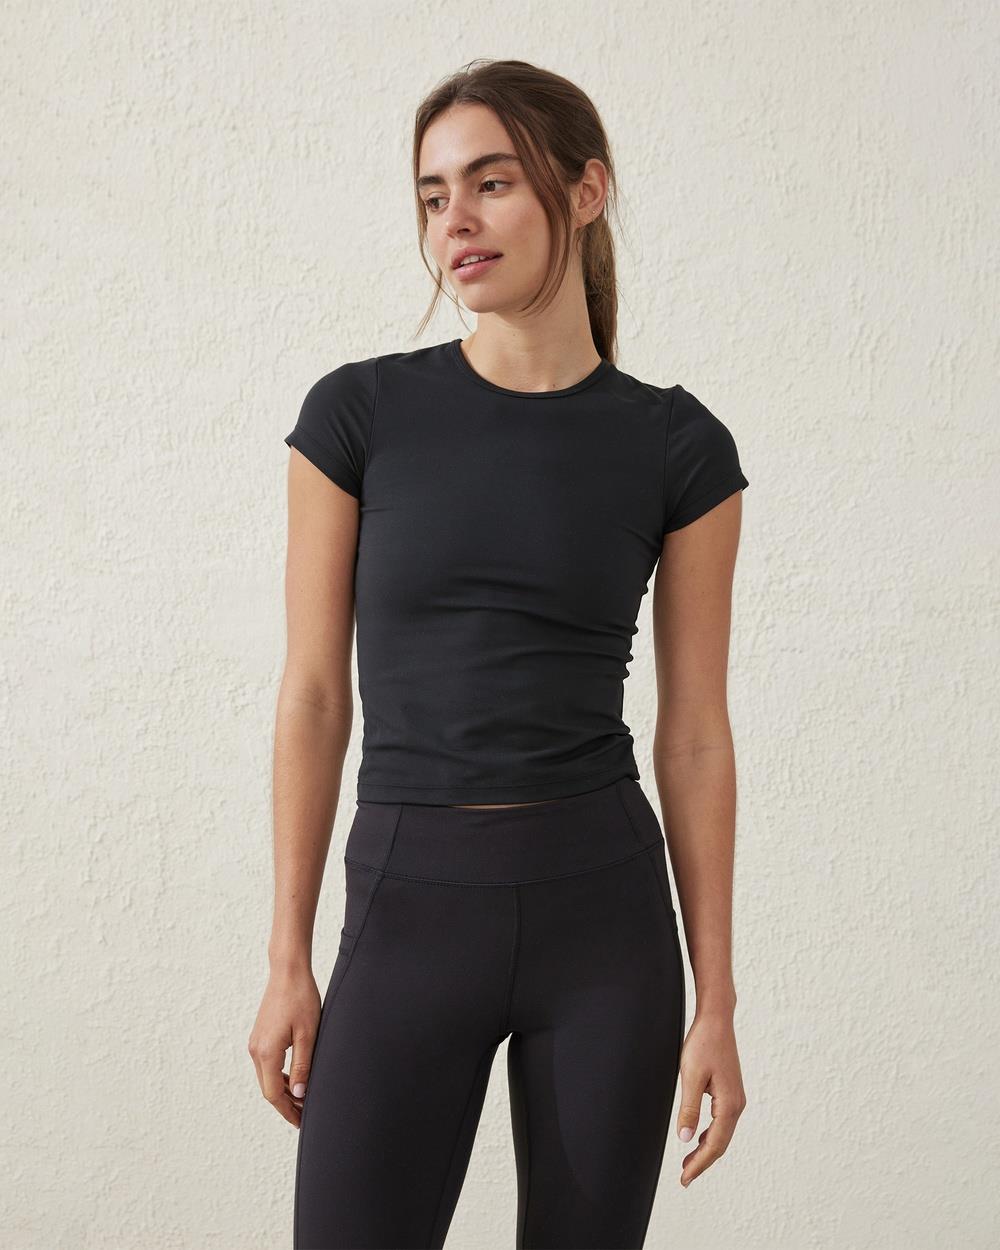 Cotton On Body - Ultra Soft Fitted Tshirt - Sports Tops & Bras (BLACK) Ultra Soft Fitted Tshirt